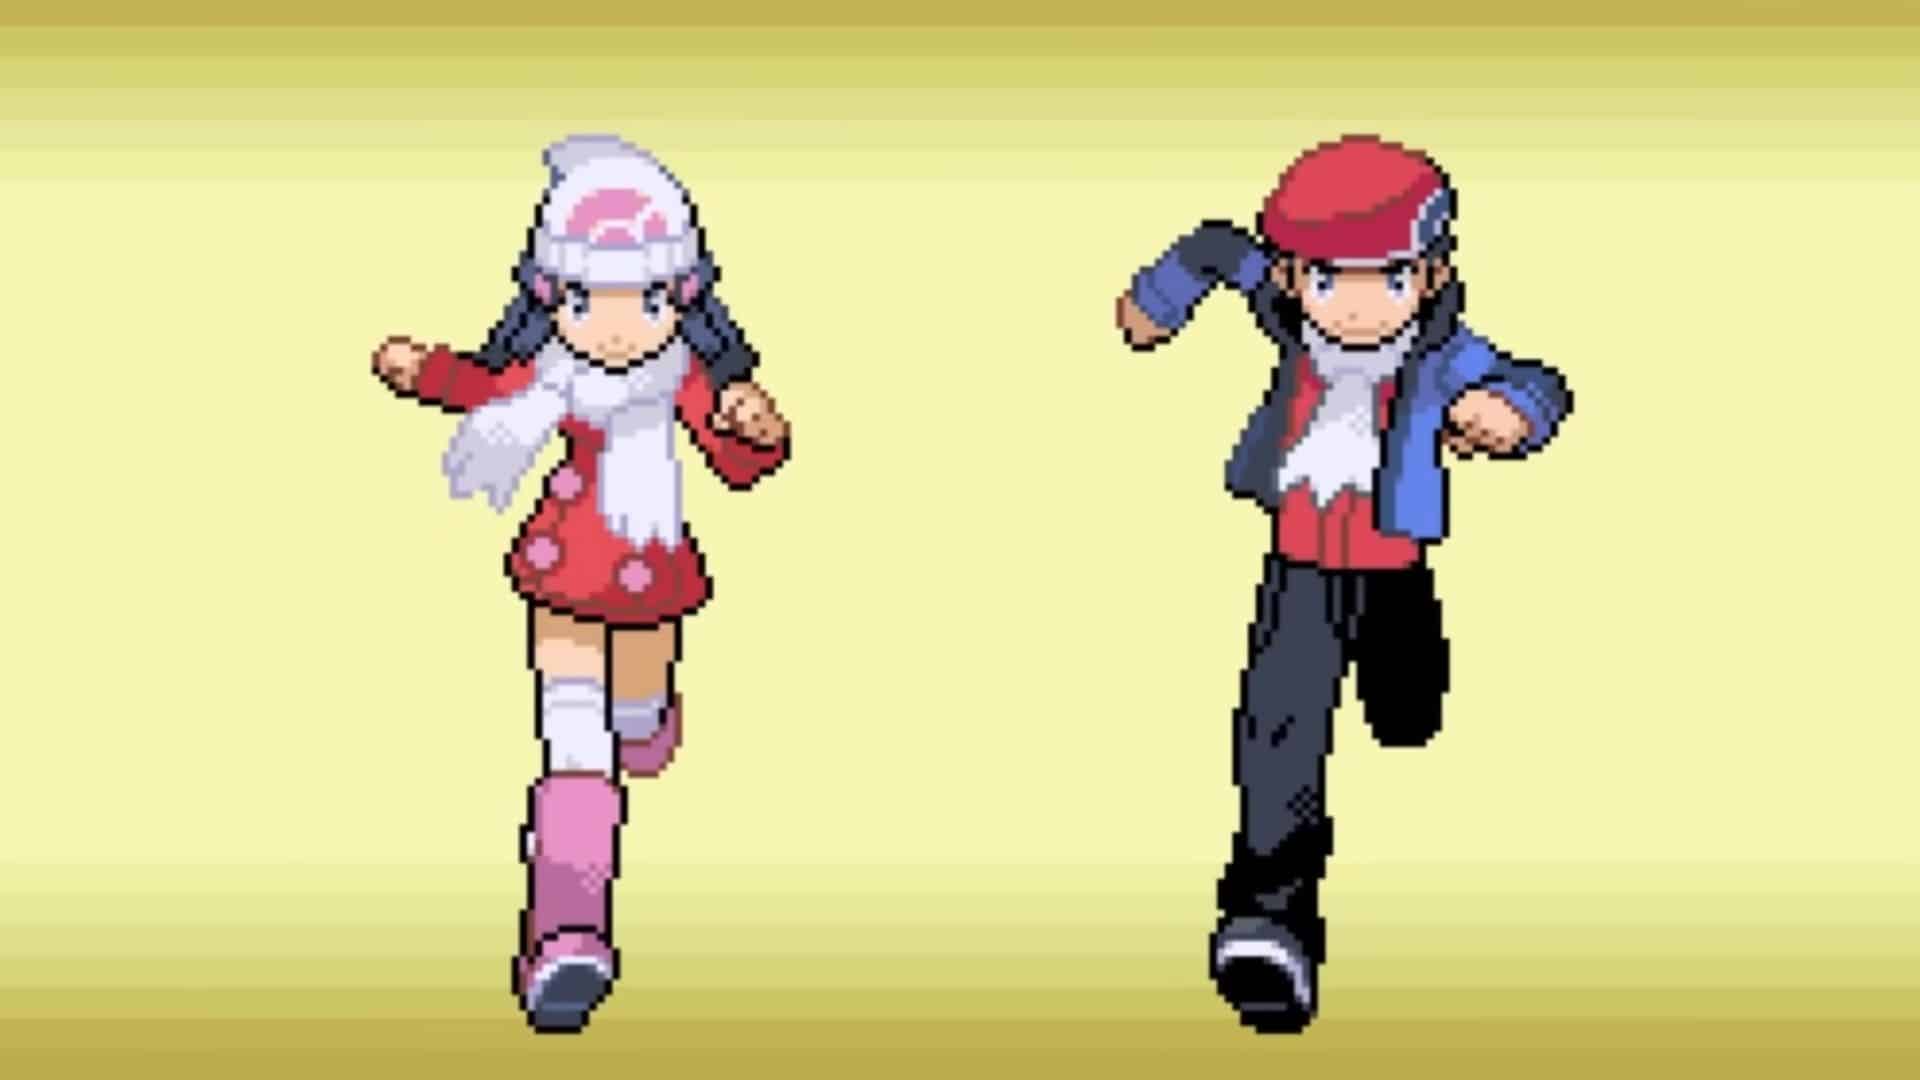 NEW)Pokemon Brilliant Diamond Shining Pearl GBA Rom Hack with Sinnoh  Region,New Moves and Much More 